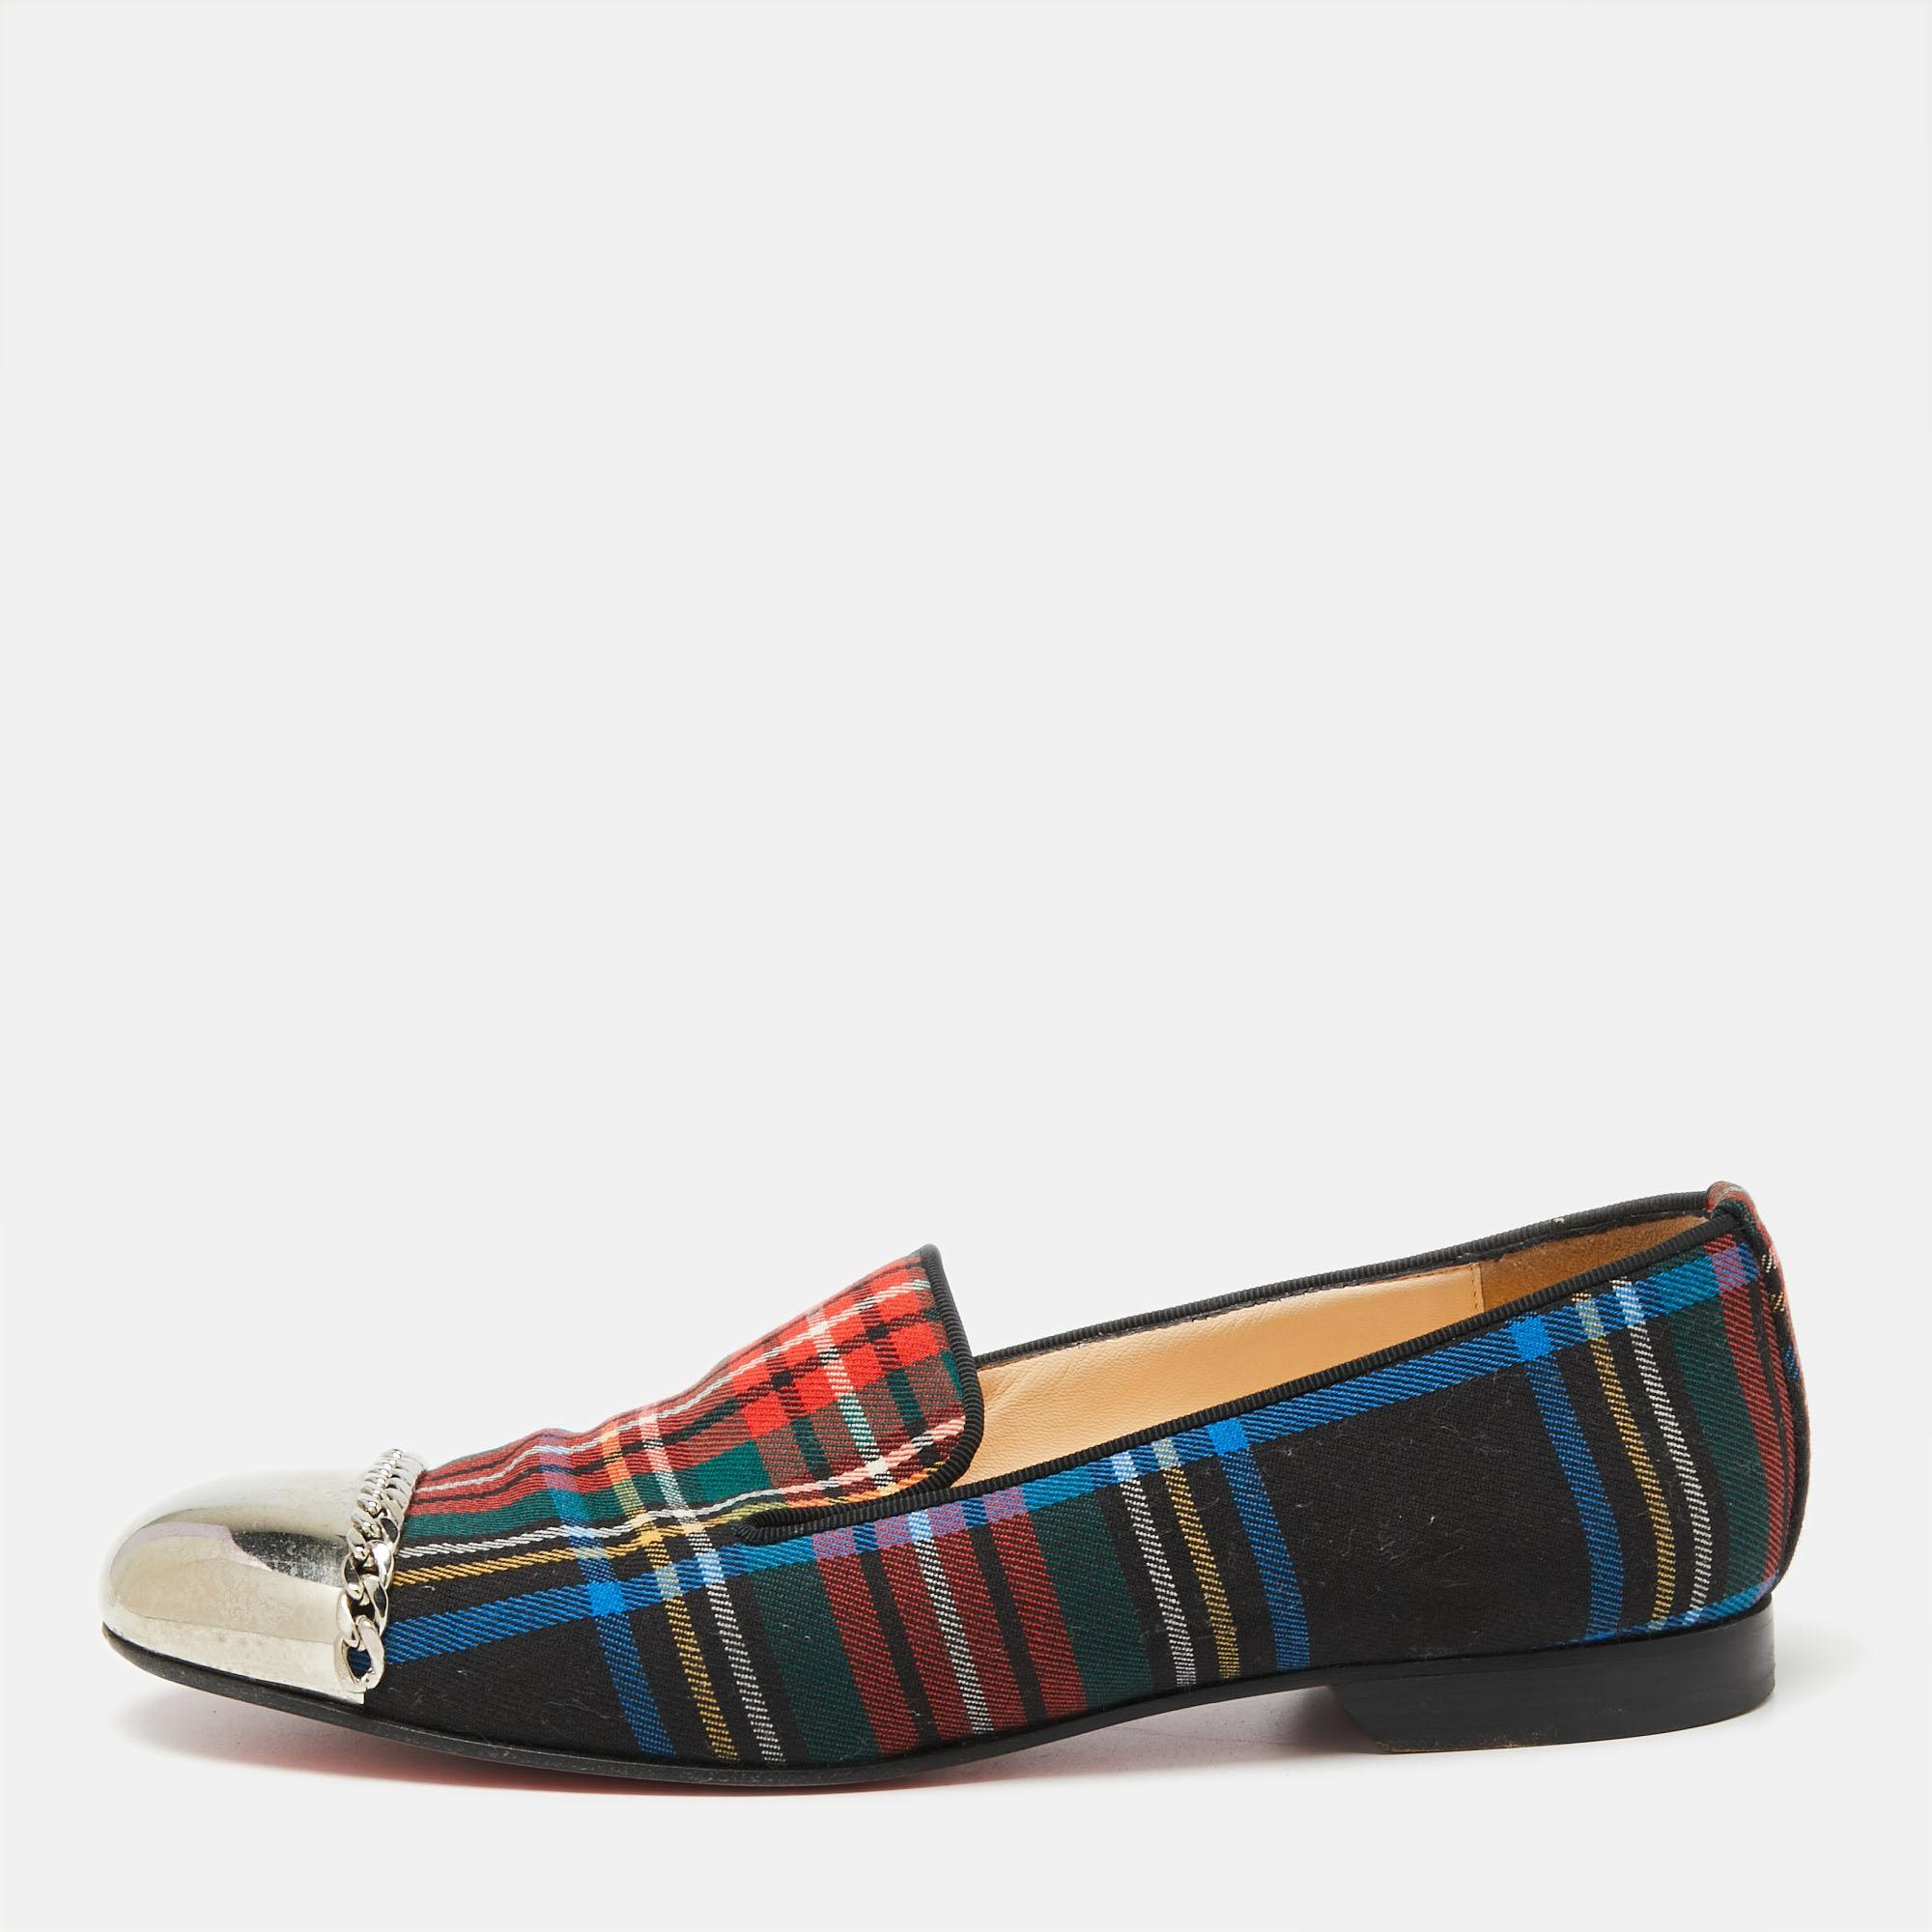 To perfectly complement your attires, Christian Louboutin brings you this pair of smoking slippers. The flats have been crafted from plaid fabric and detailed with metal cap toes. These comfortable slippers are a great choice to complement your